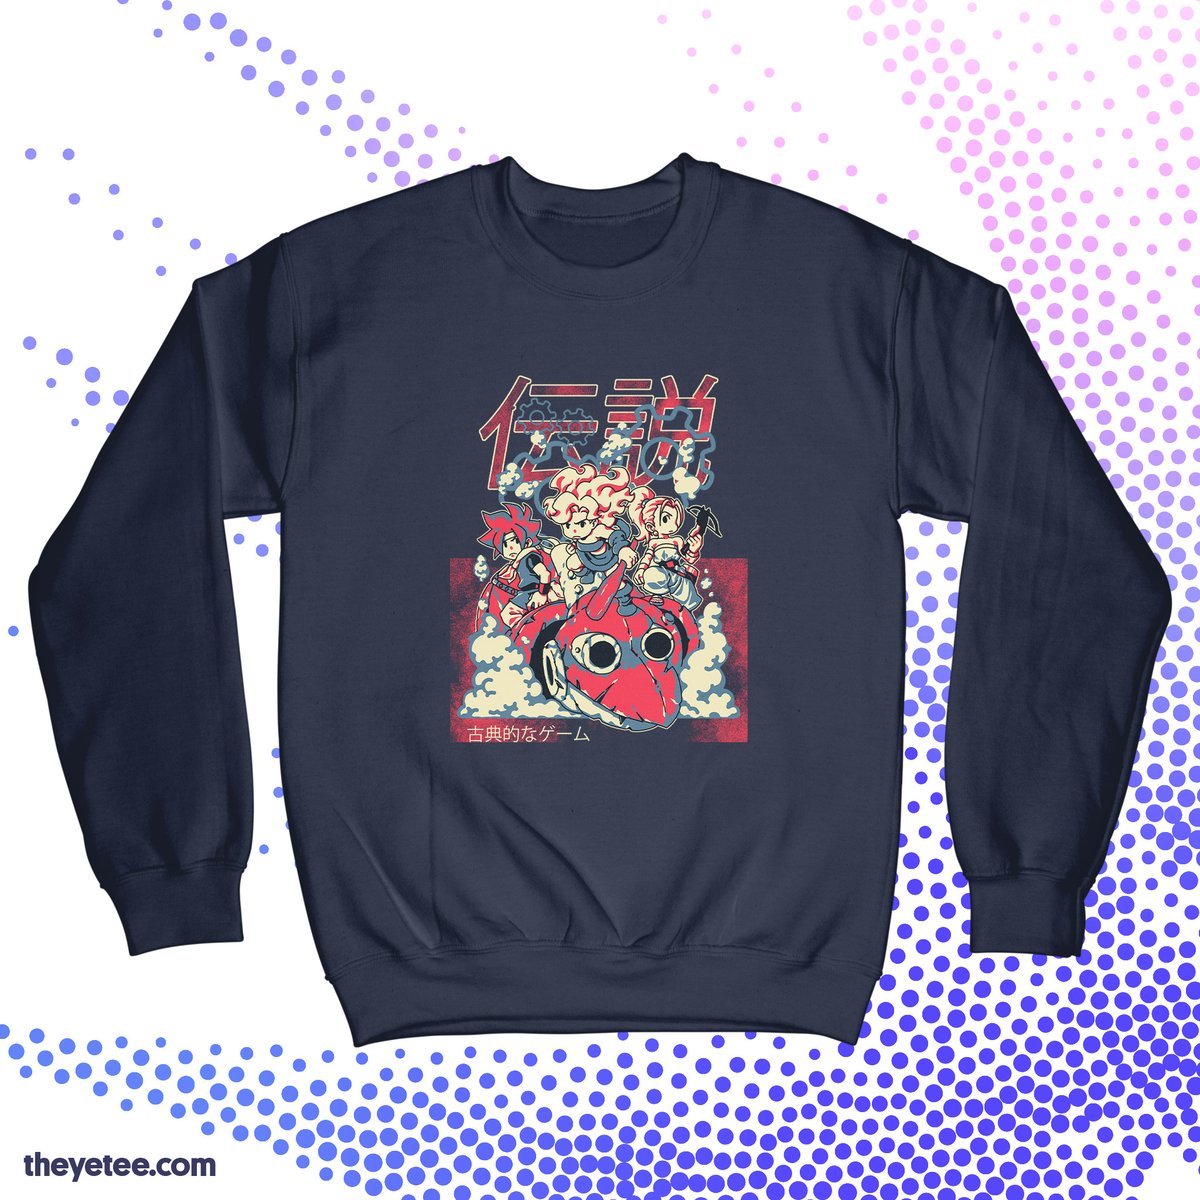 「Time and time again, they're going to co」|The Yetee 🌈のイラスト